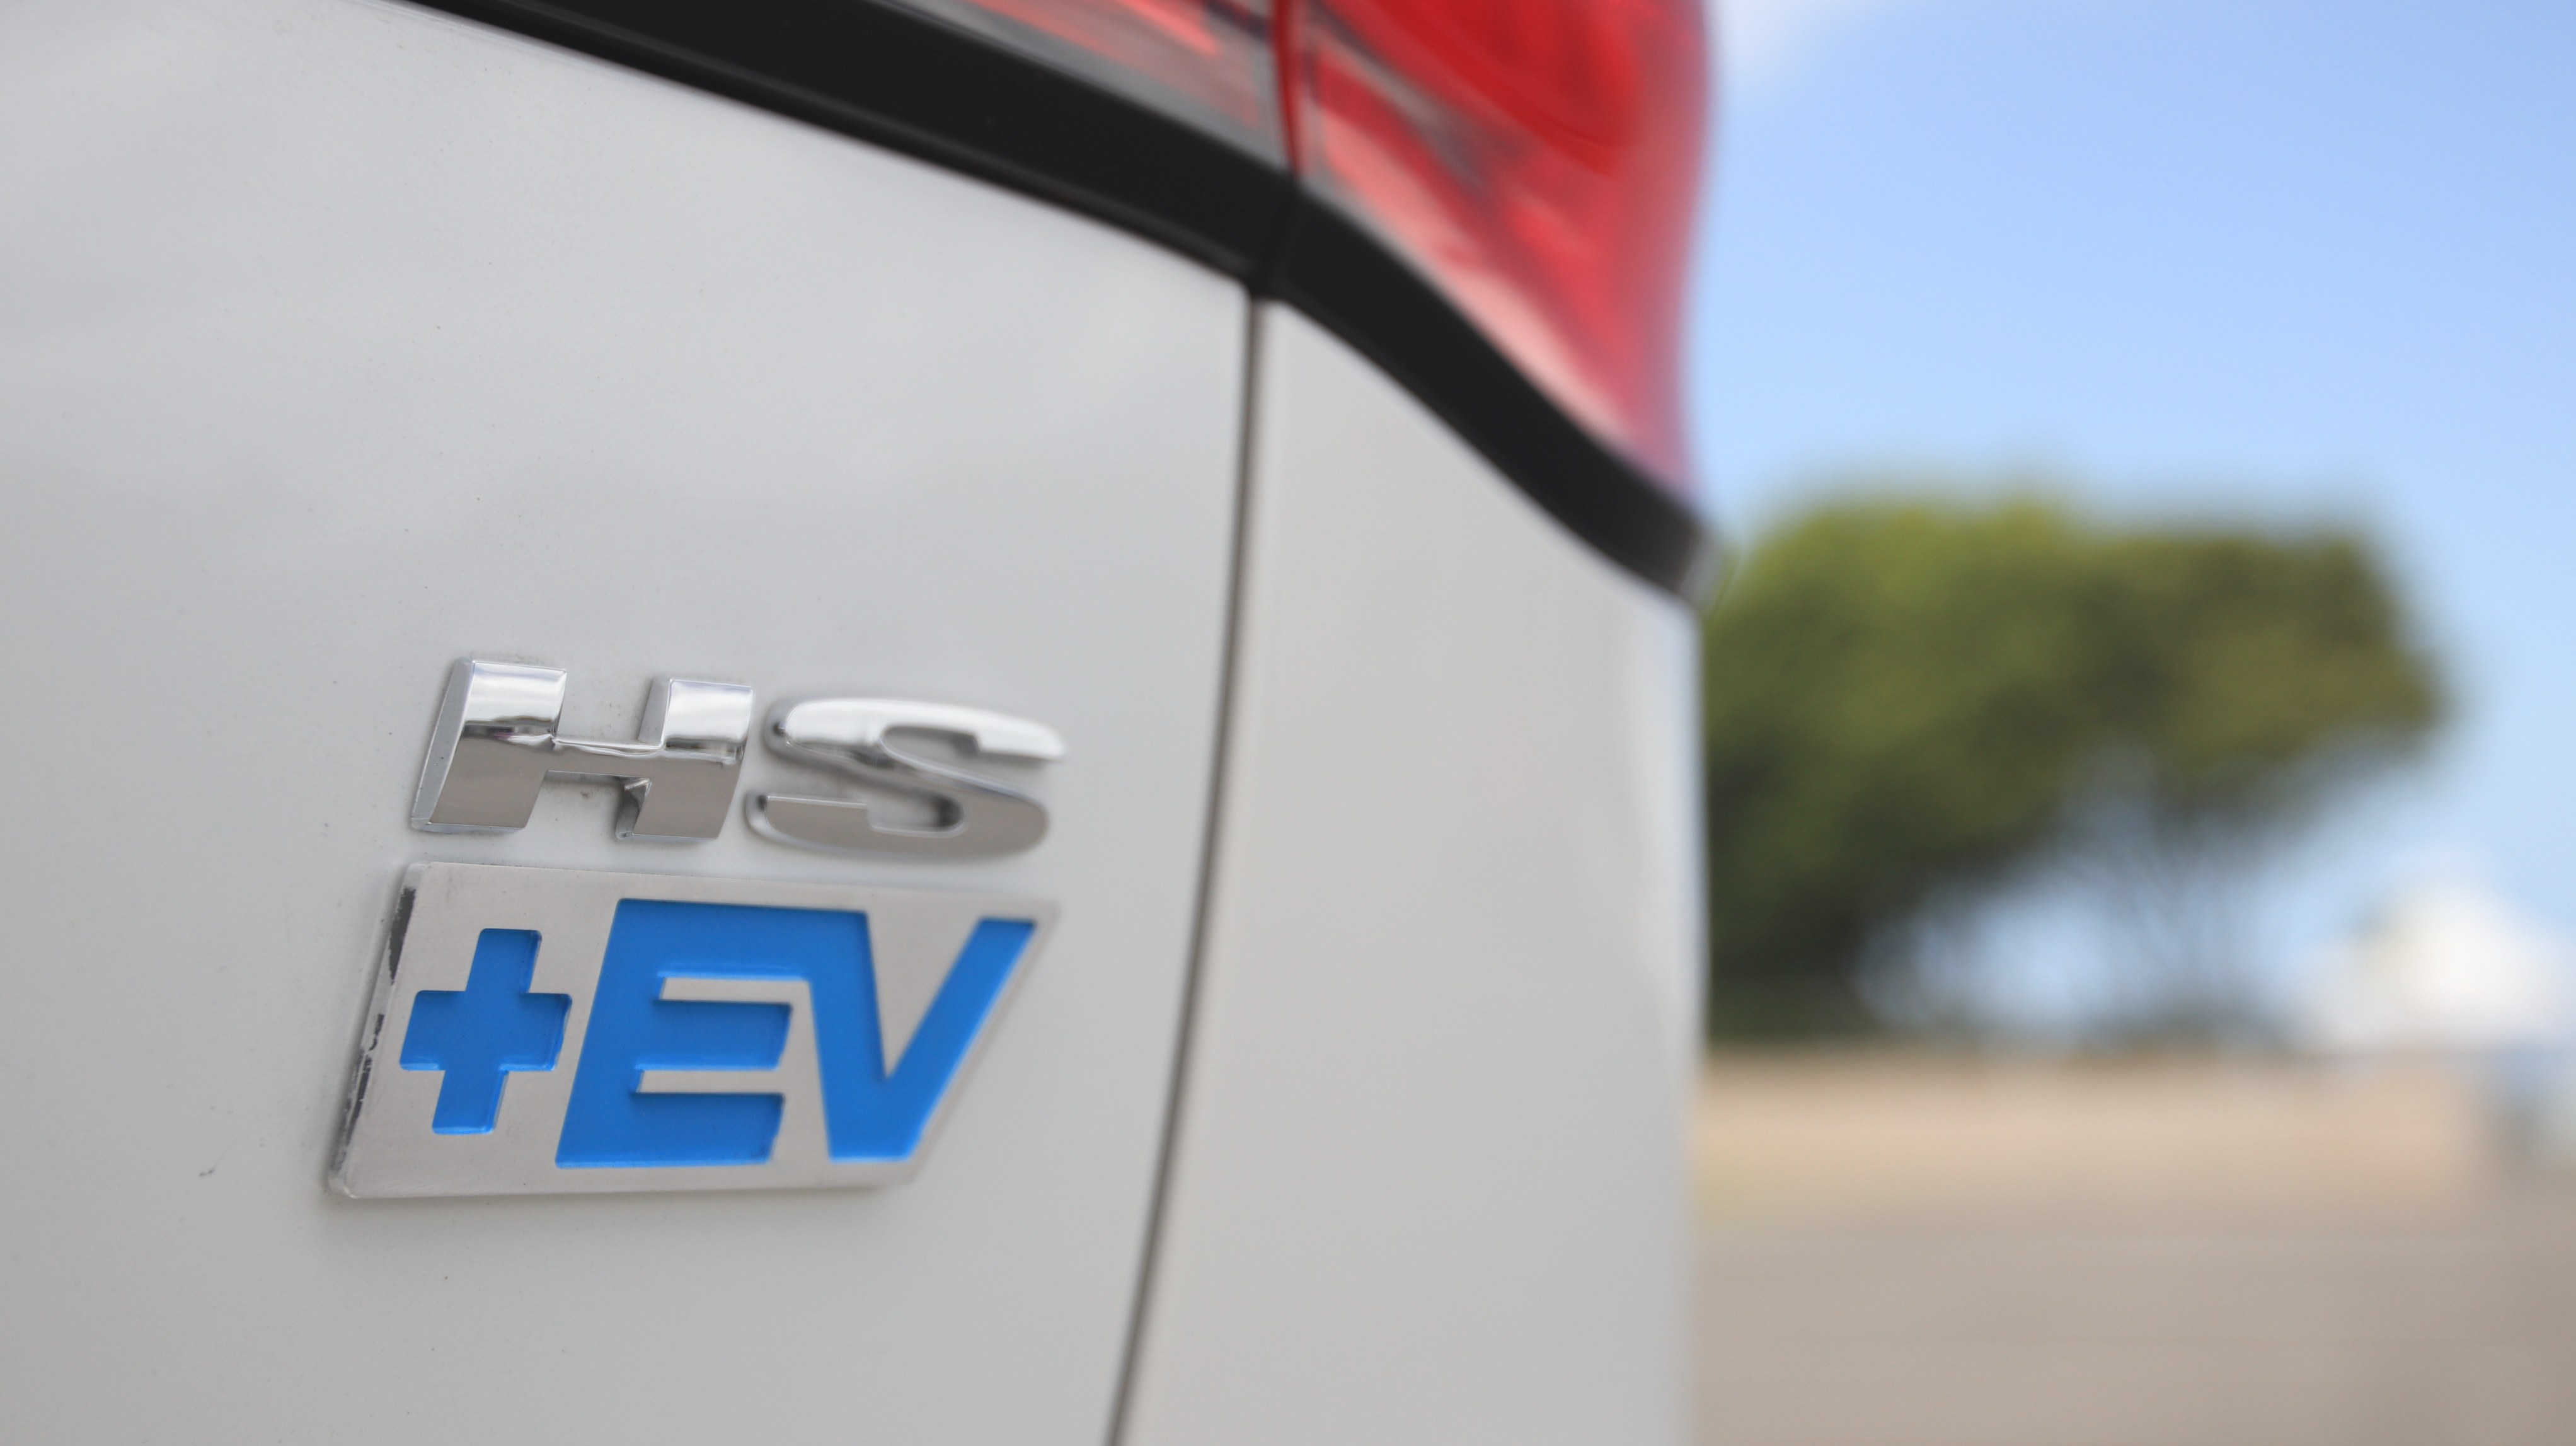 How does the HS Plus EV transmission work?